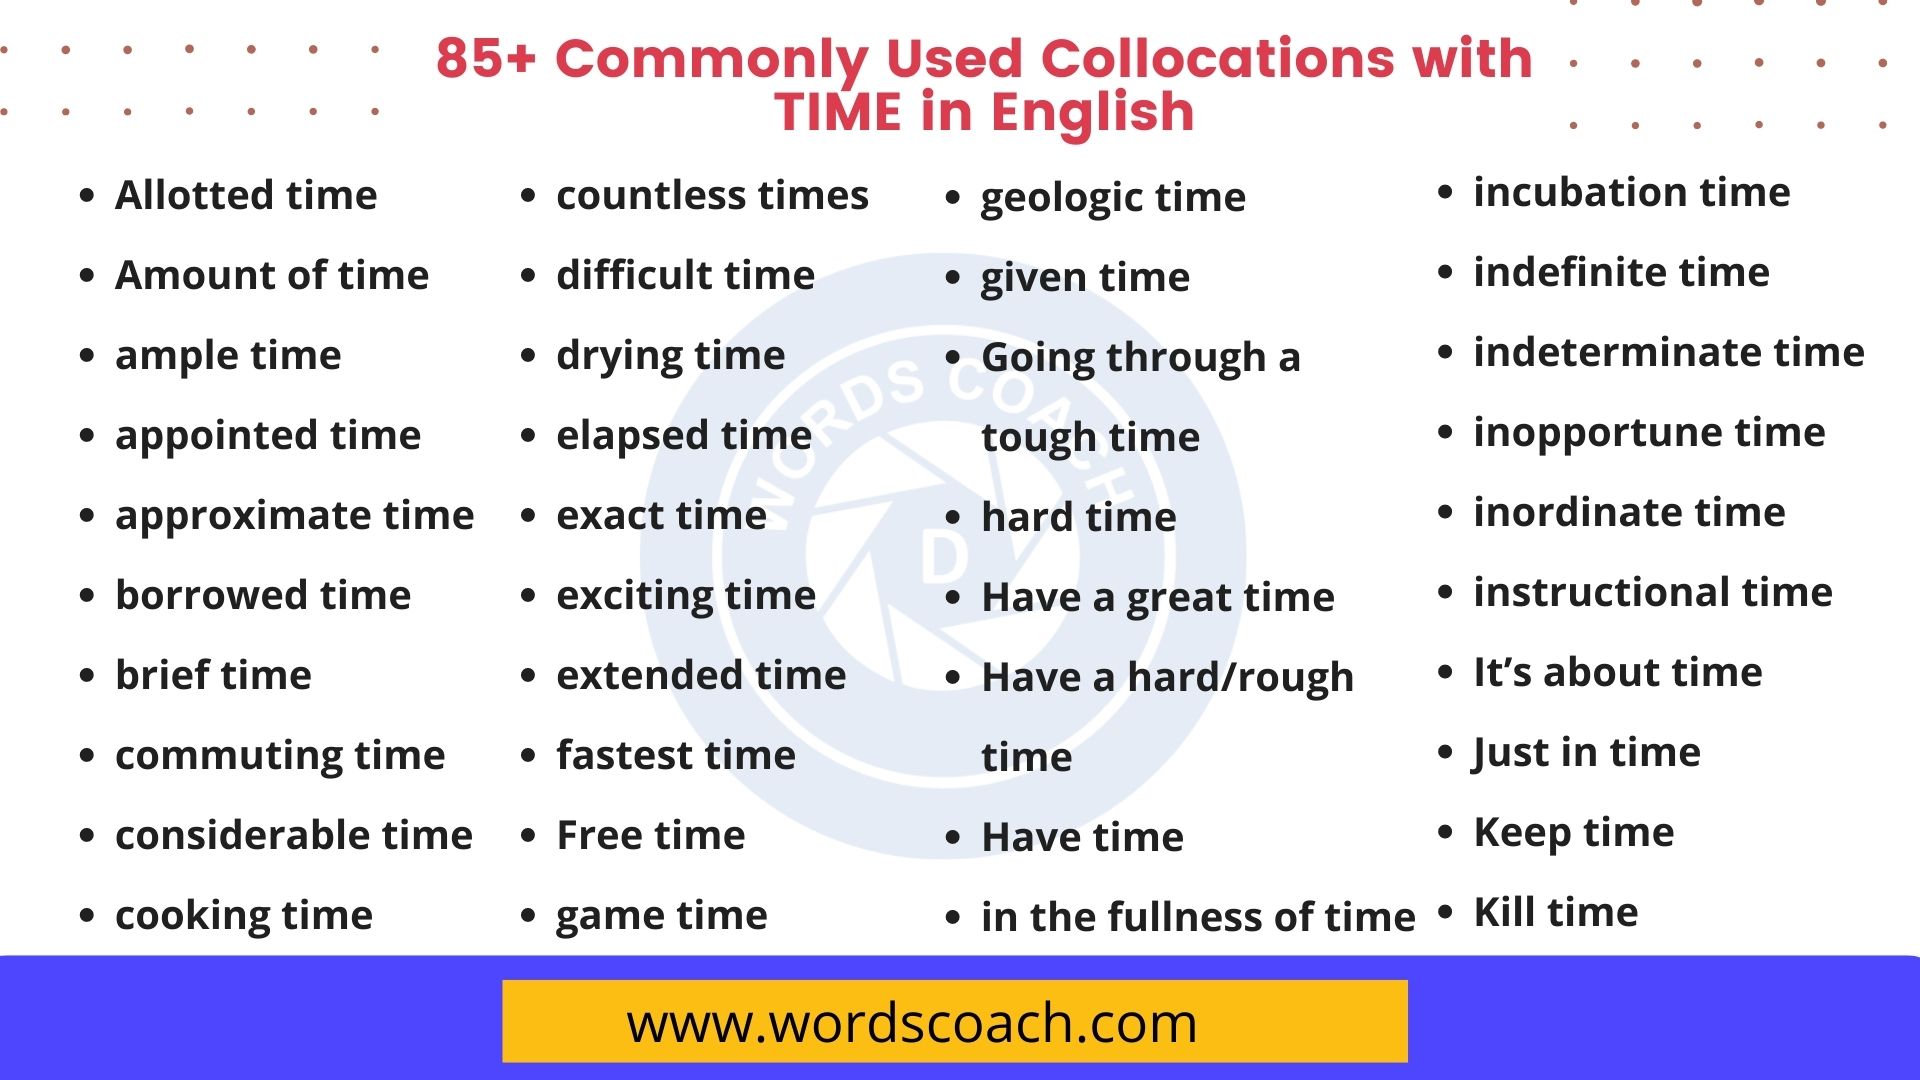 85+ Commonly Used Collocations with TIME in English - wordscoach.com